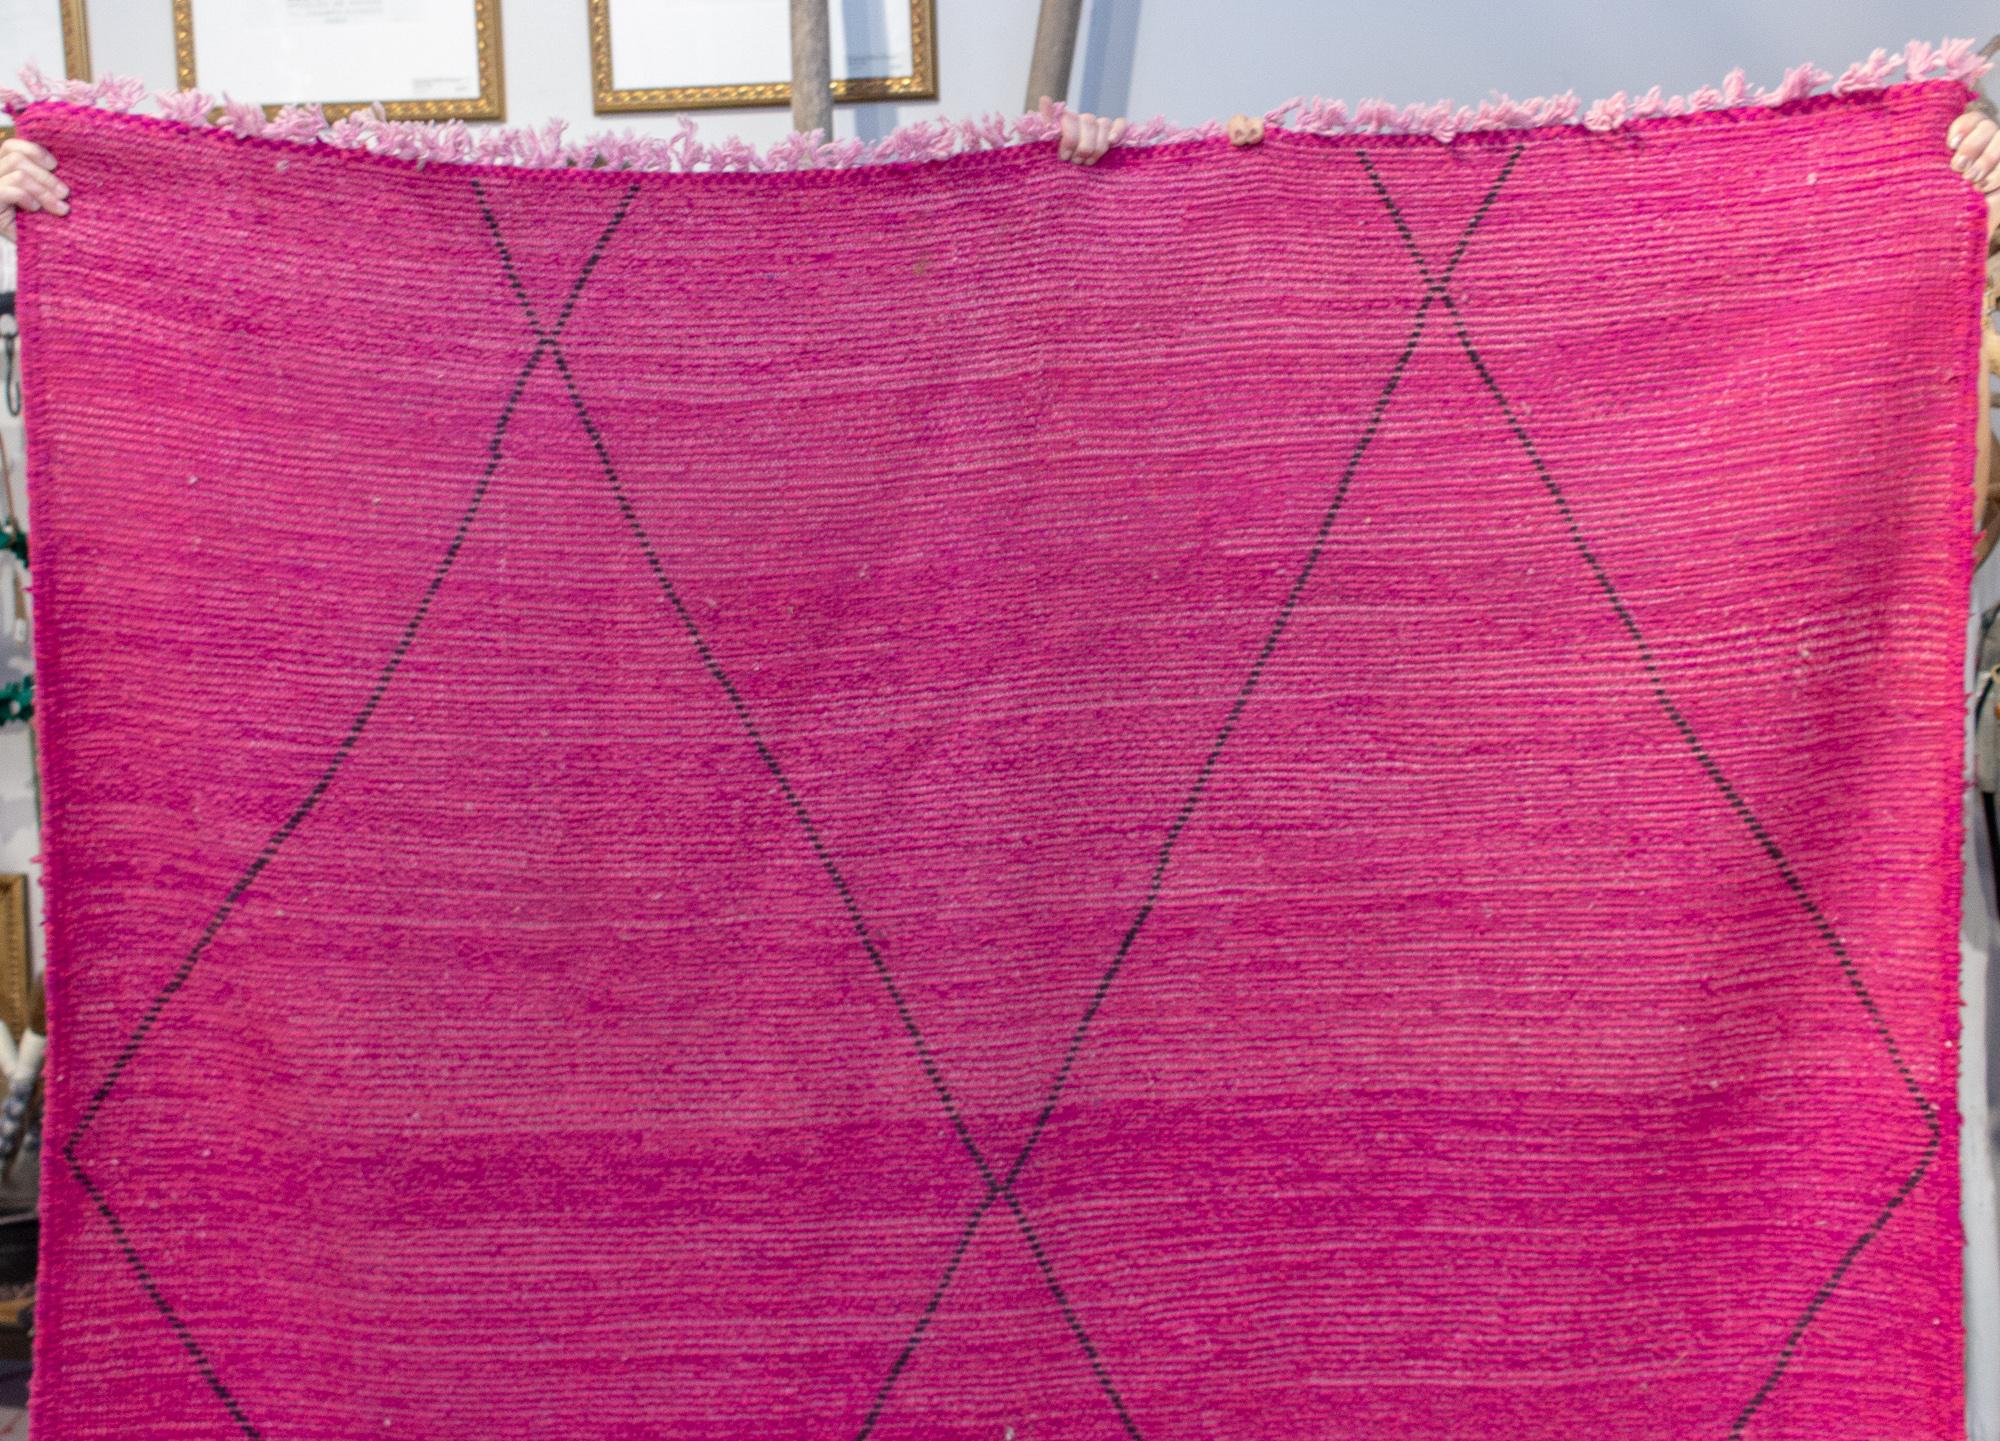 Contemporary Moroccan Beni Ourain Double Sided Wool Rug in Hot Pink and Black